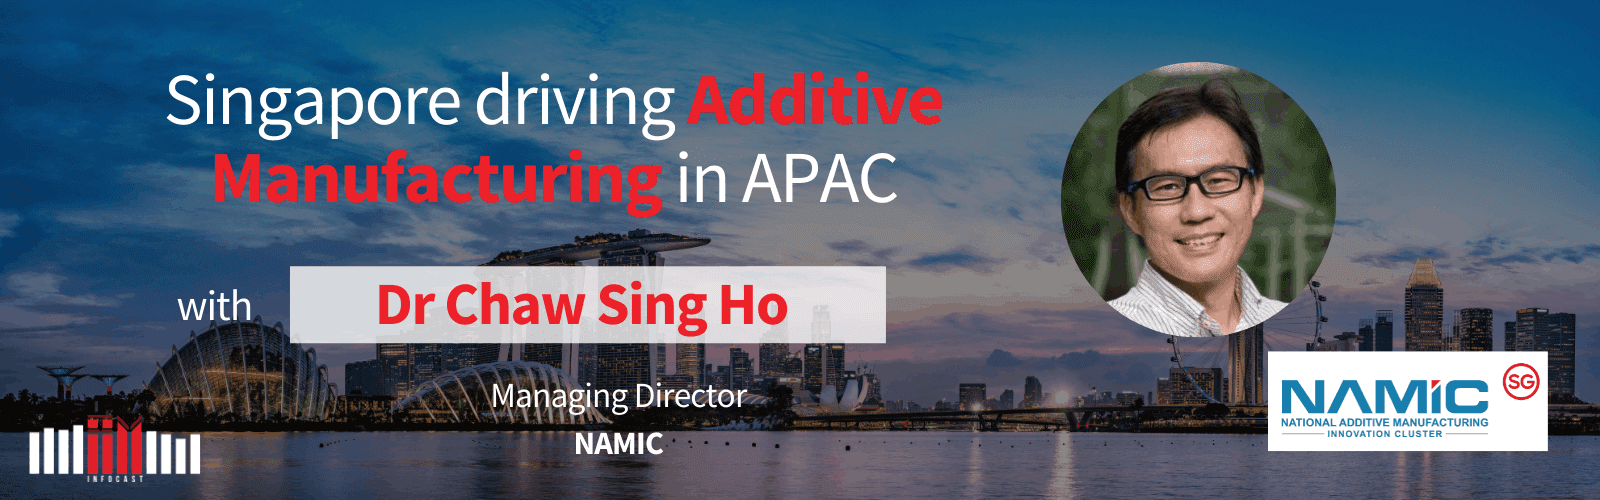 Singapore Driving Additive Manufacturing in APAC